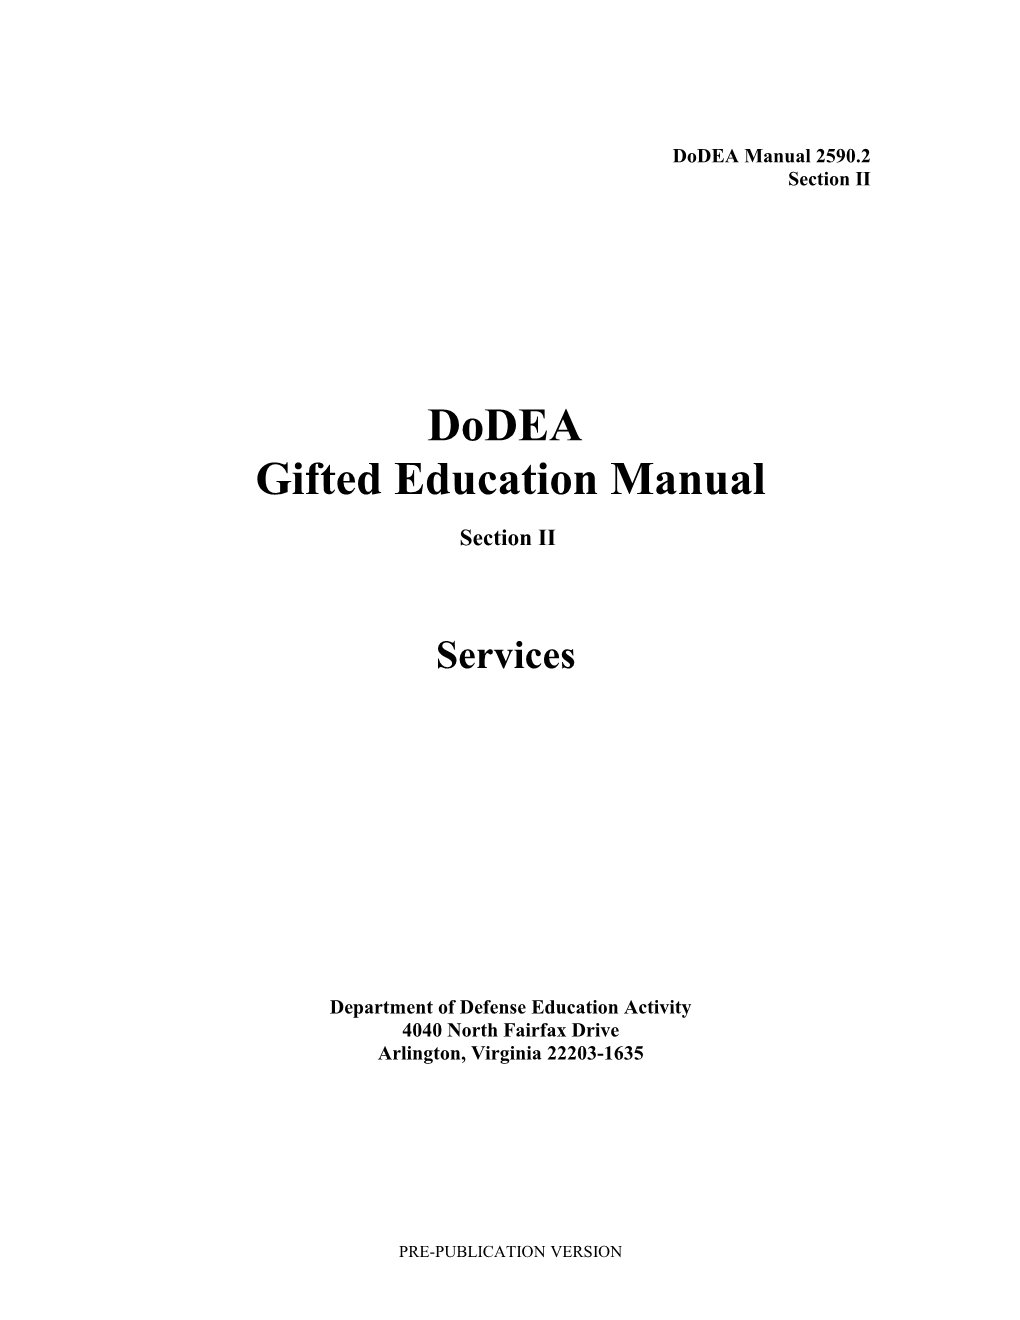 Students Identified for Gifted Education Services Should Be Provided with an Appropriate